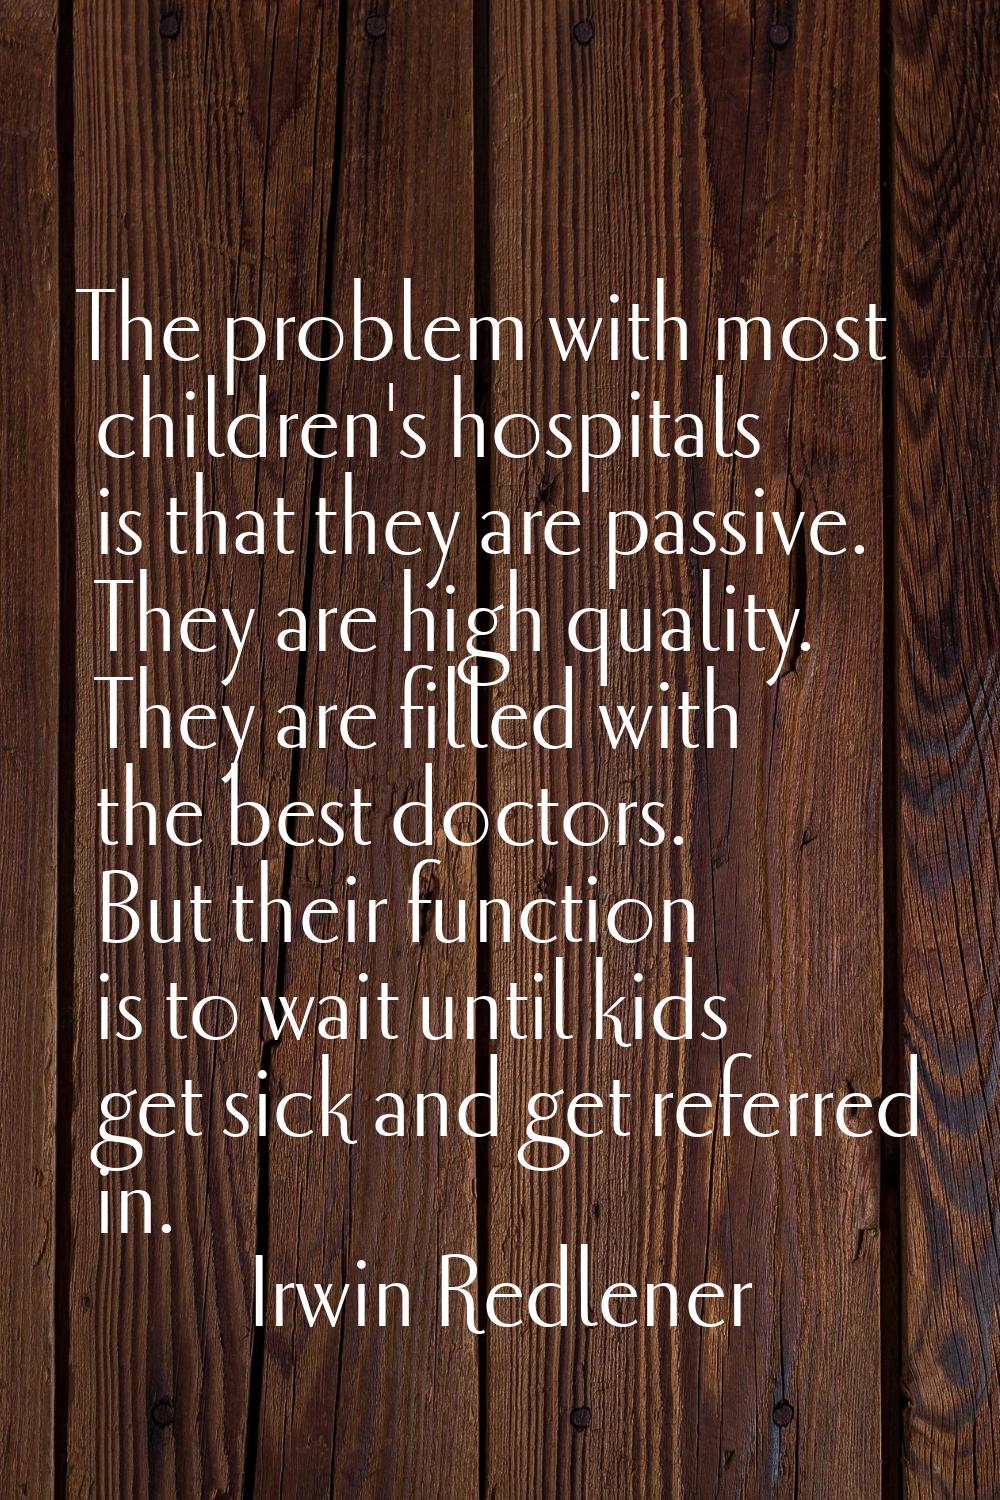 The problem with most children's hospitals is that they are passive. They are high quality. They ar